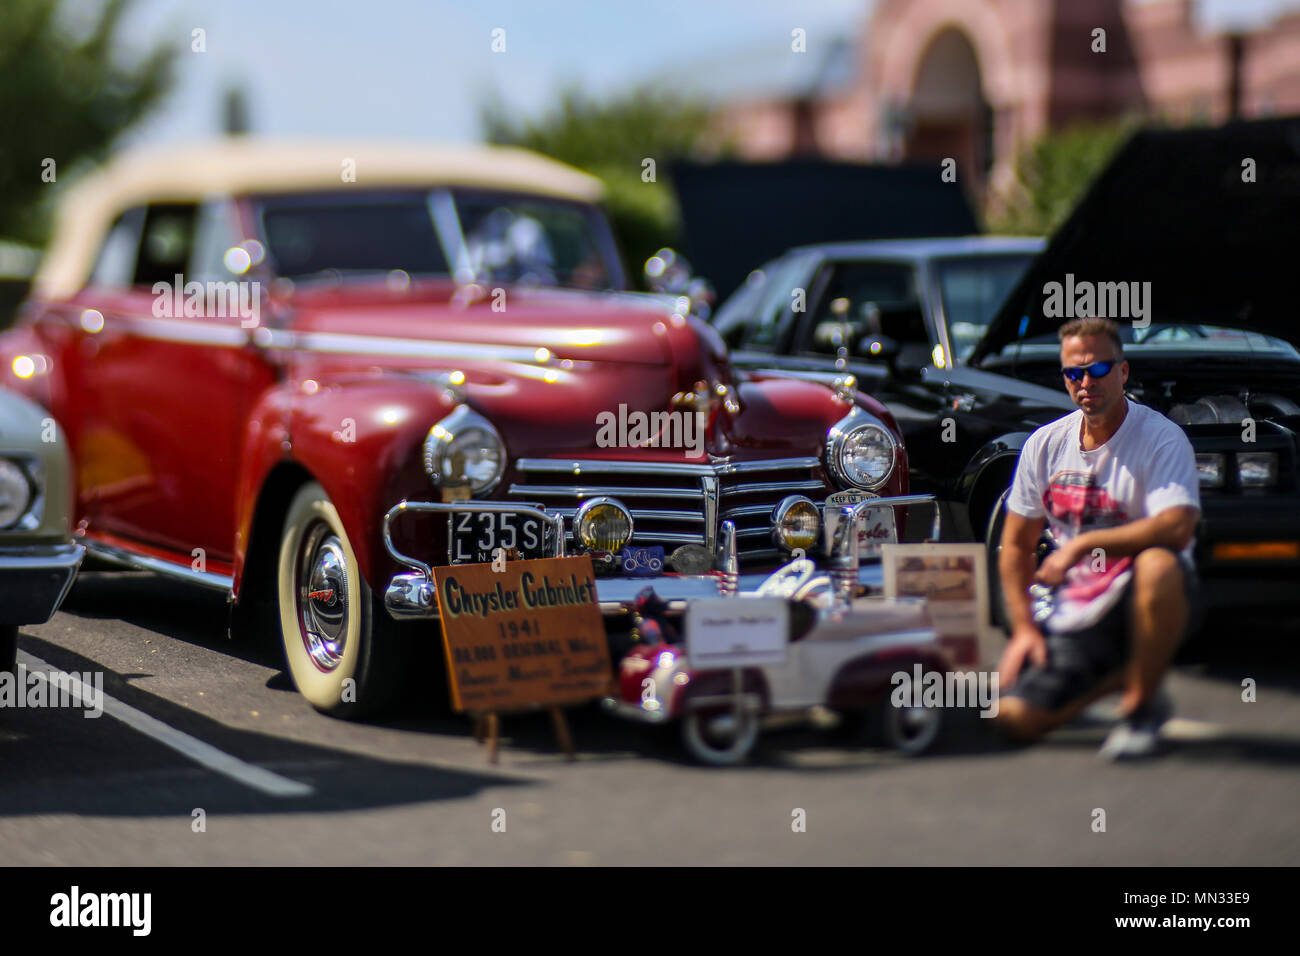 Michael Sarnoff stands for a portrait in front of his 1941 Chrysler Cabriolet at the New Jersey Veterans Memorial Home in Vineland, N.J., Aug. 27, 2017. Sarnoff is part of the 10th annual Salute to Our Veterans, a car and motorcycle cruise dedicated to the veterans who live at the home. Over 500 vehicles and 200 motorcycles attended the event. Sarnoff's father originally owned the car, and was a veteran of World War II. (U.S. Air National Guard photo by Master Sgt. Matt Hecht/Released) Stock Photo